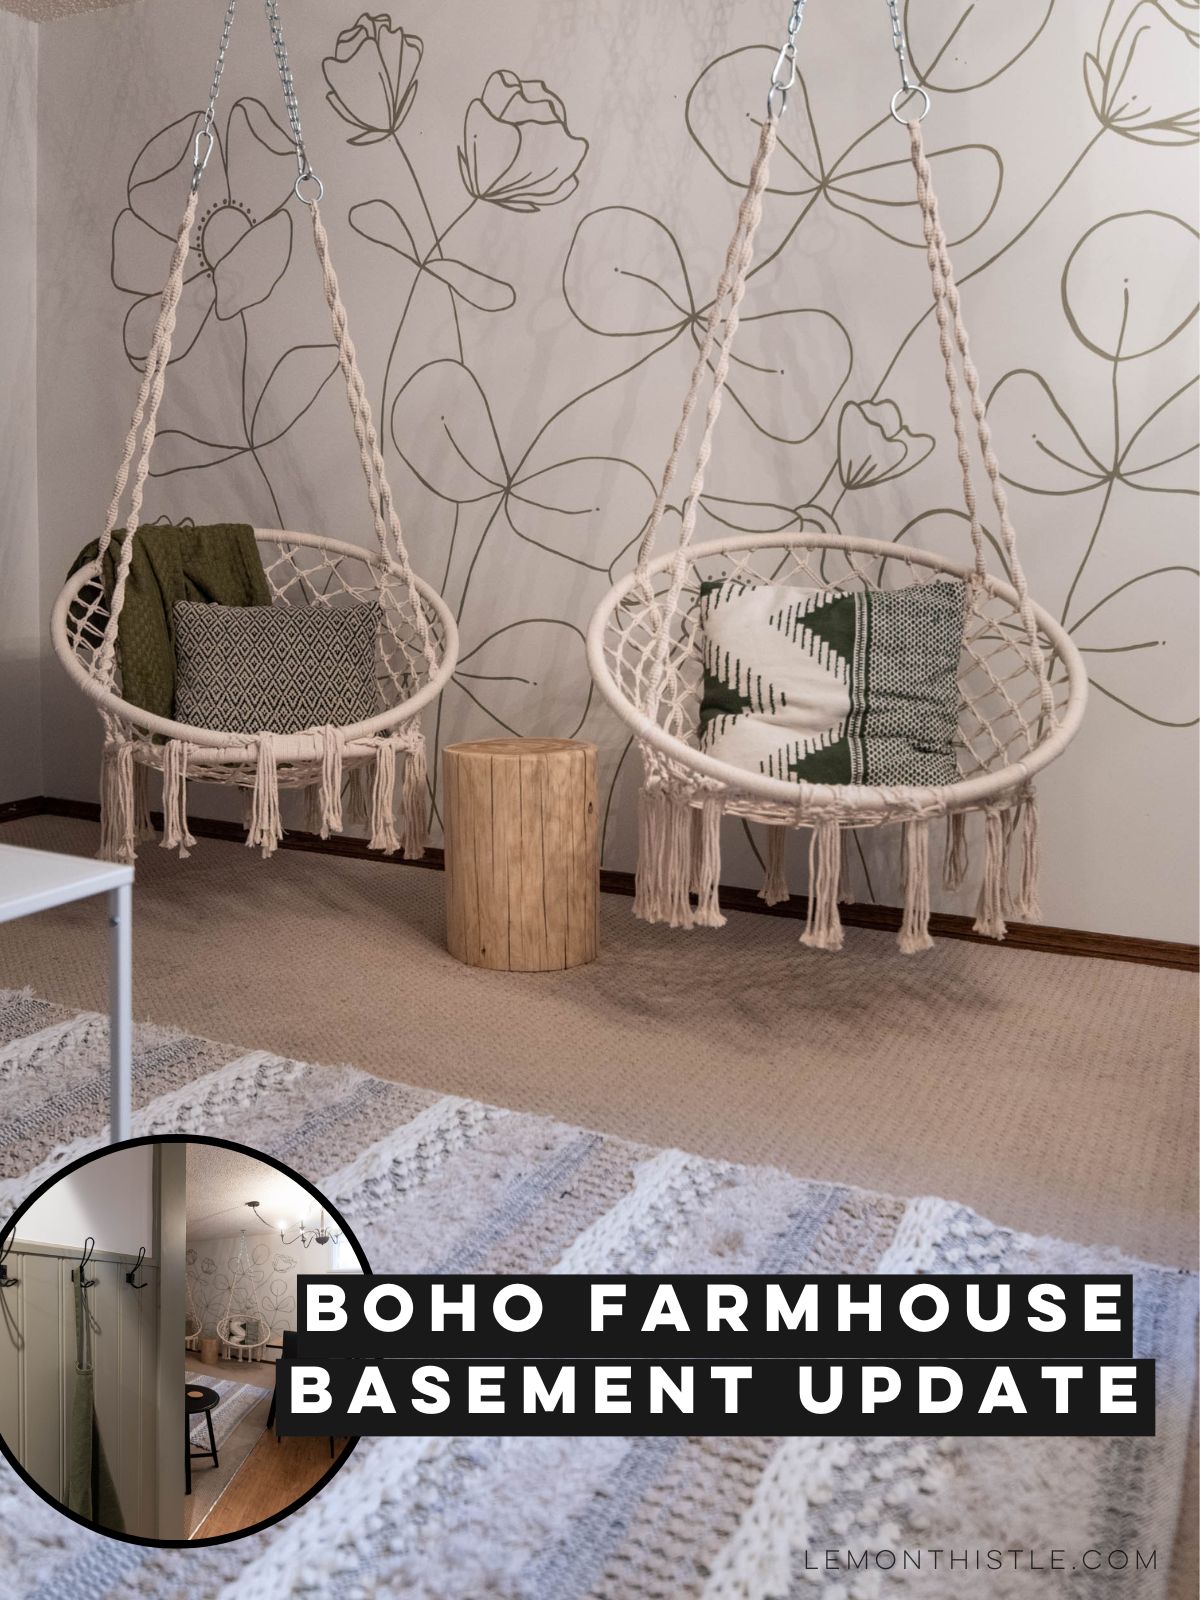 photo of two hanging macrame chairs in front of a hand painted line art floral mural; image overlay of beadboard wrapped hallway with black farmhouse hooks. Text over reads: boho farmhouse basement update